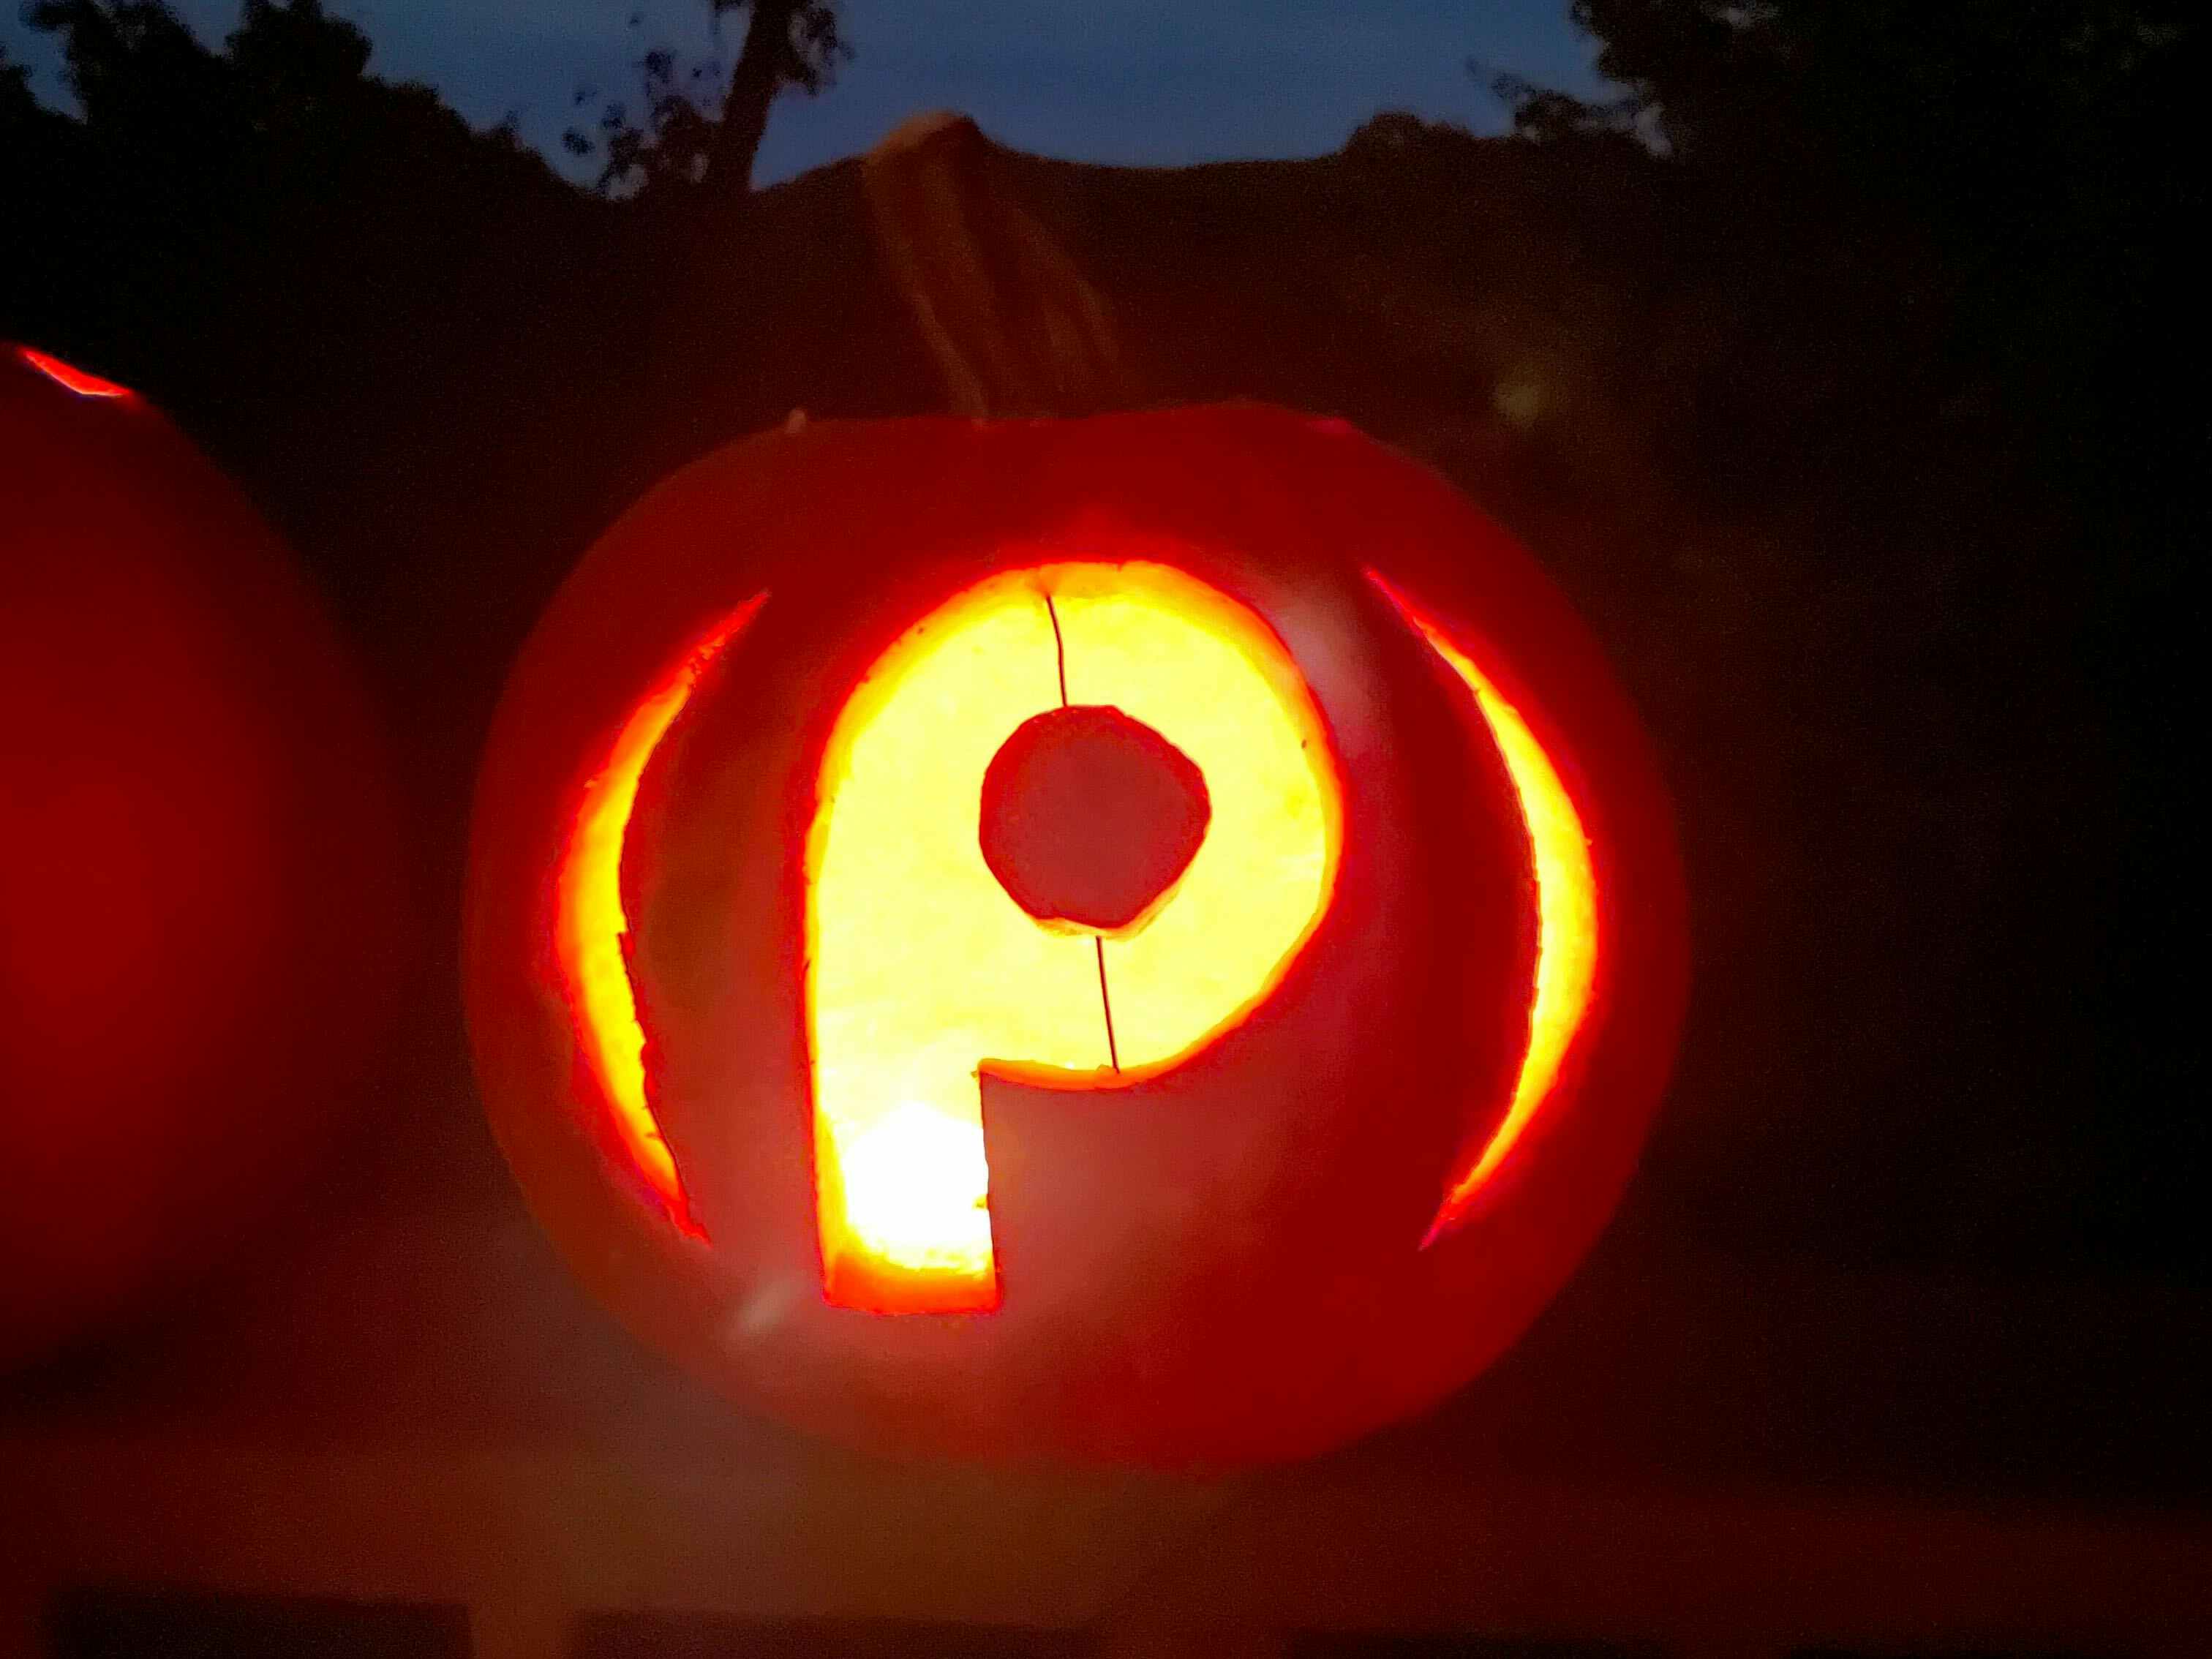 Pumpkin carved with the Publix store logo on it.